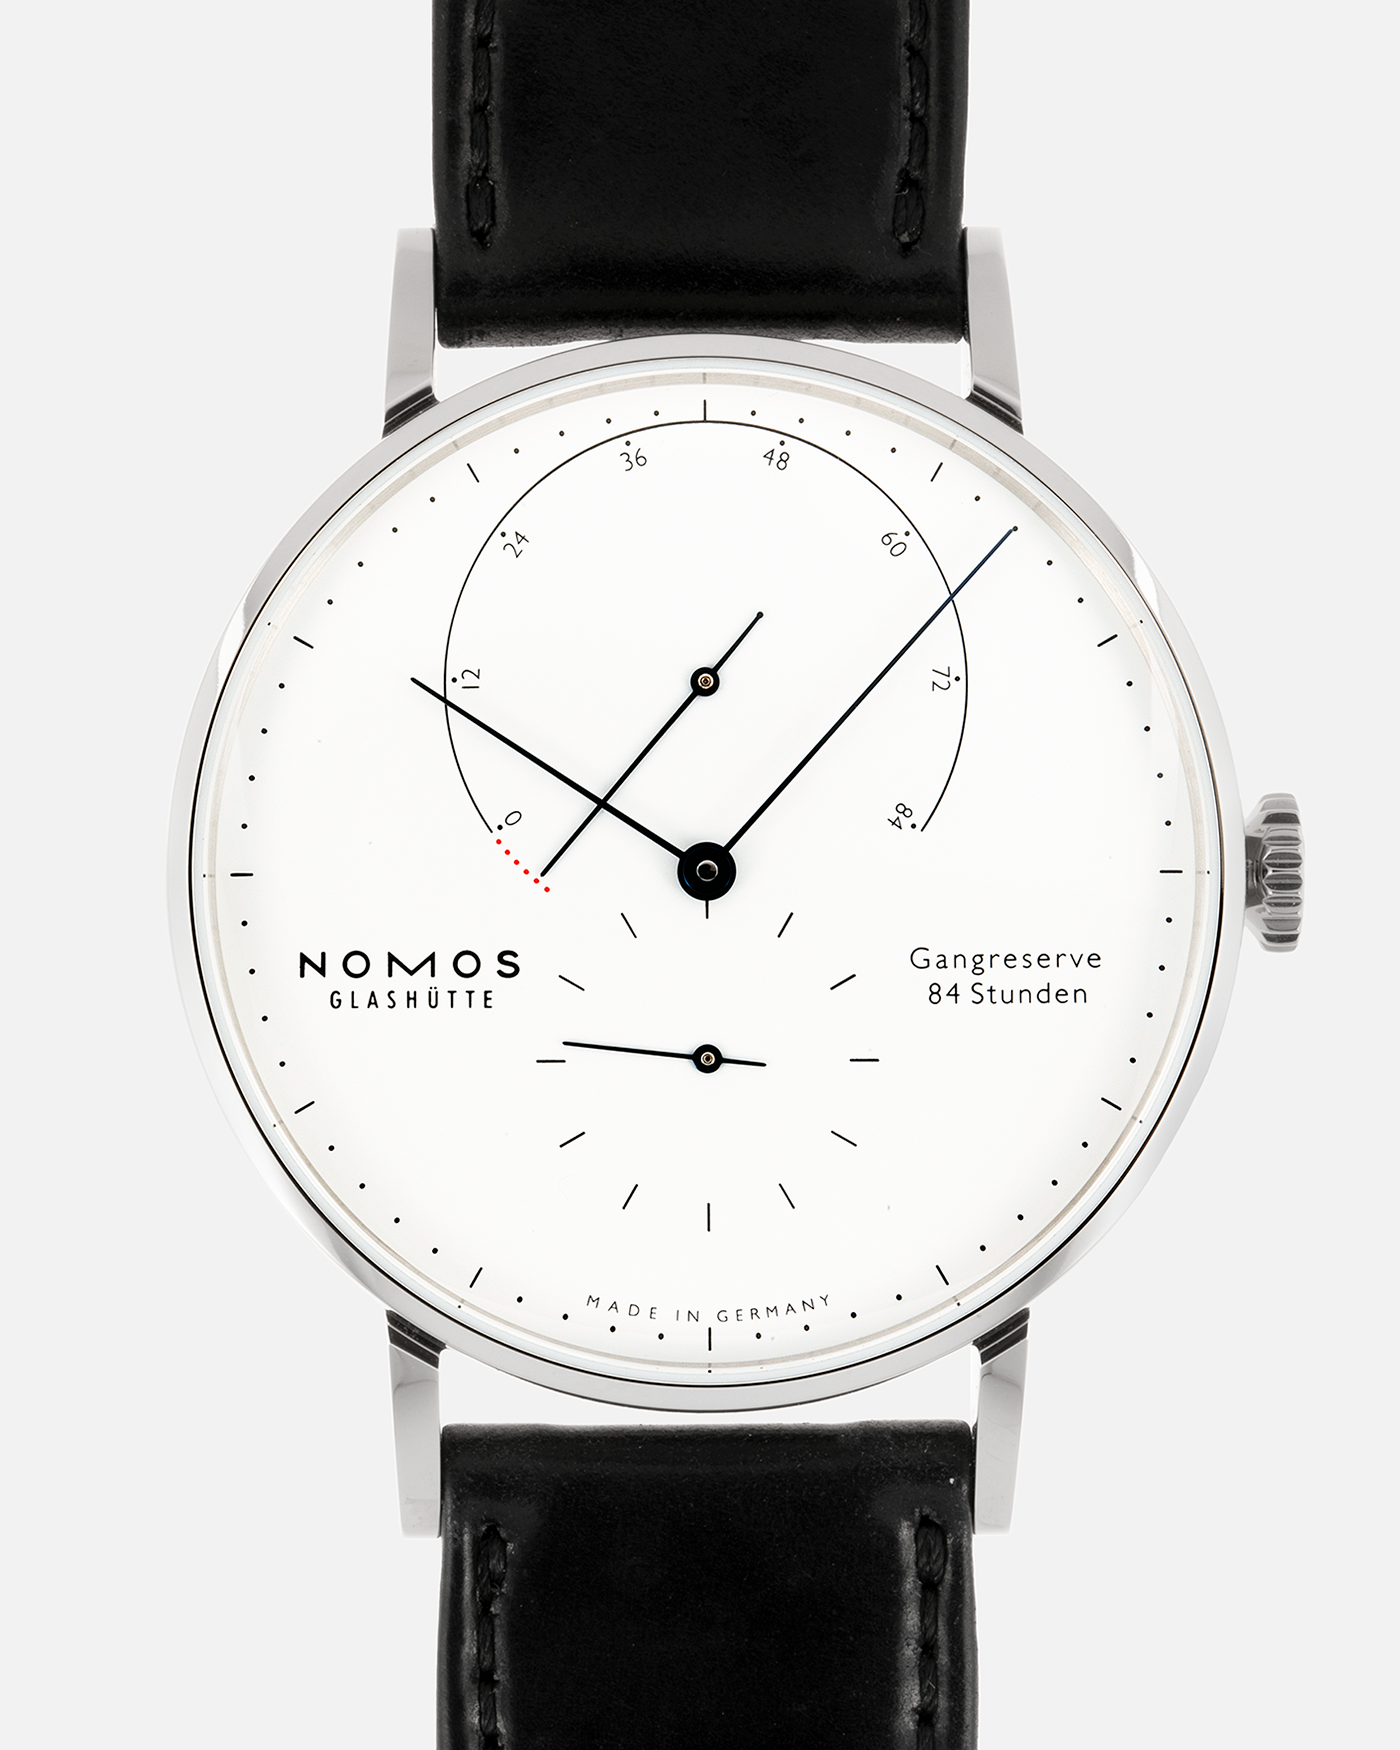 Brand: Nomos Year: 2020 Model: Lambda “175 Years Watchmaking Glashutte” Material: Stainless Steel Movement: Nomos DUW 1001 Case Diameter: 40.5mm Bracelet/Strap: Nomos Black Horween Shell Cordovan with Stainless Steel Tang Buckle